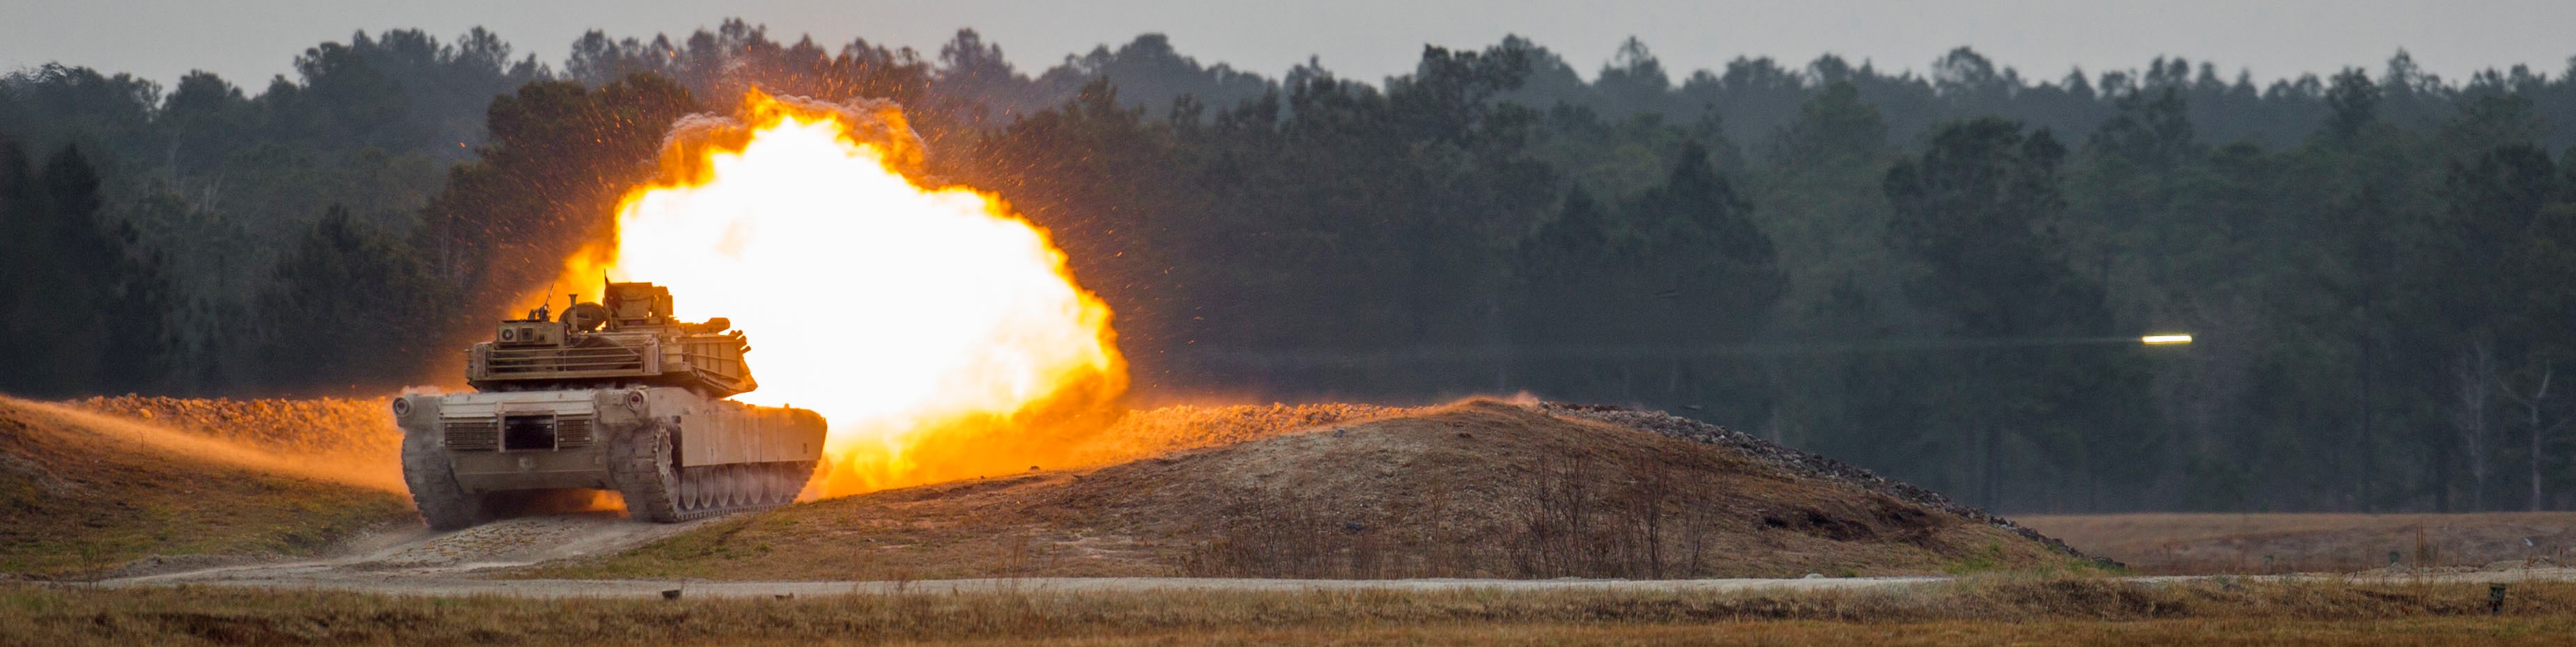 U.S. Marines with Company B, 2nd Tank Battalion, fires a 120mm smoothbore main gun from an M1A1 Abrams Main Battle Tank during a live-fire exercise at Range SR-10, Camp Lejeune, N.C., Jan. 28, 2016. 2nd Tank Battalion conducted marksmanship qualifications during a month-long field exercise. (U.S. Marine Corps photo by Lance Cpl. Judith L. Harter, MCIEAST Combat Camera/Released)